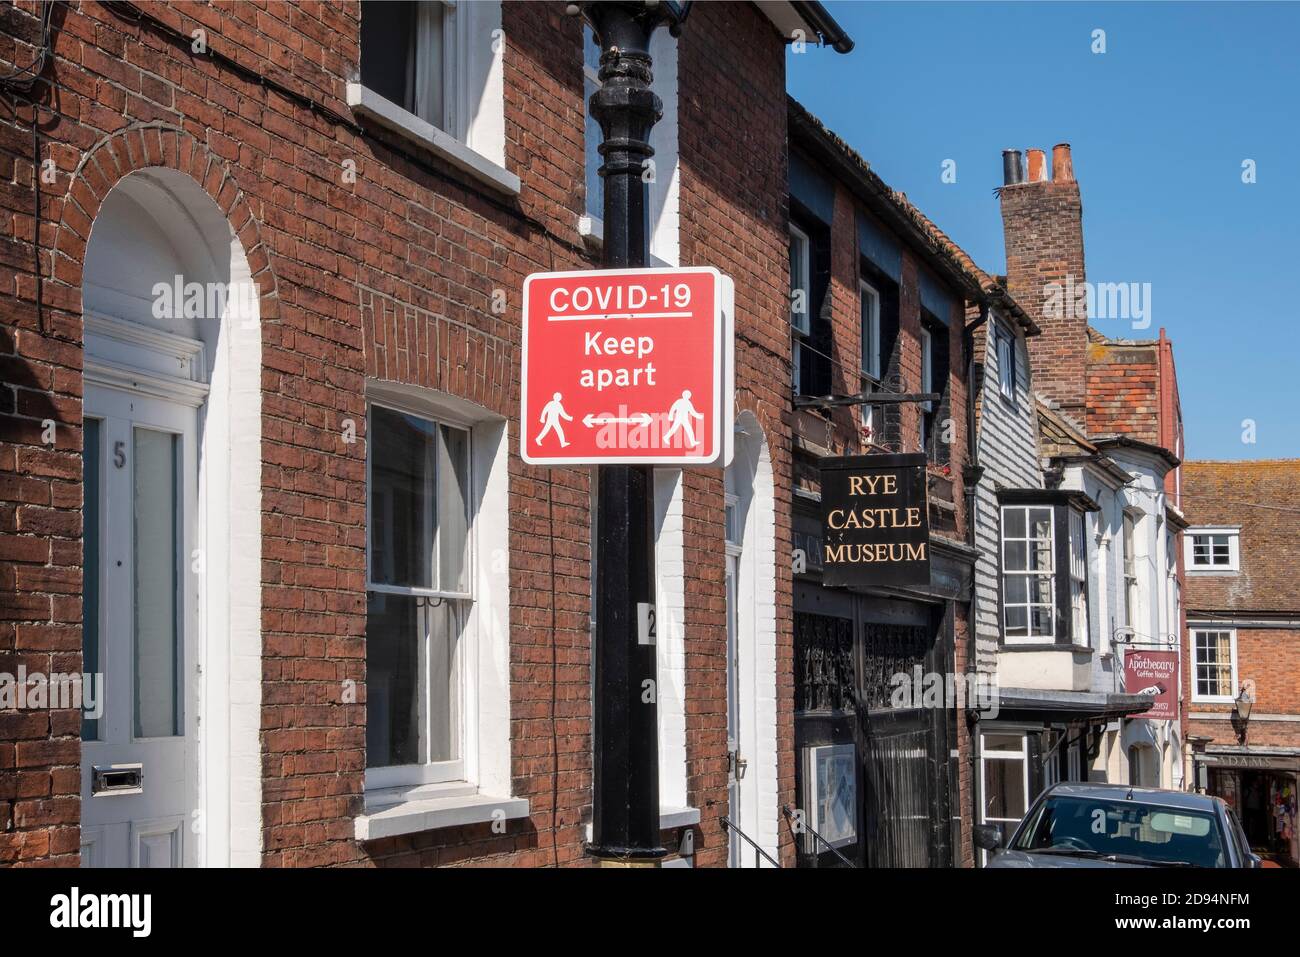 Covid 19, social distancing sign in Rye, East Sussex, UK Stock Photo